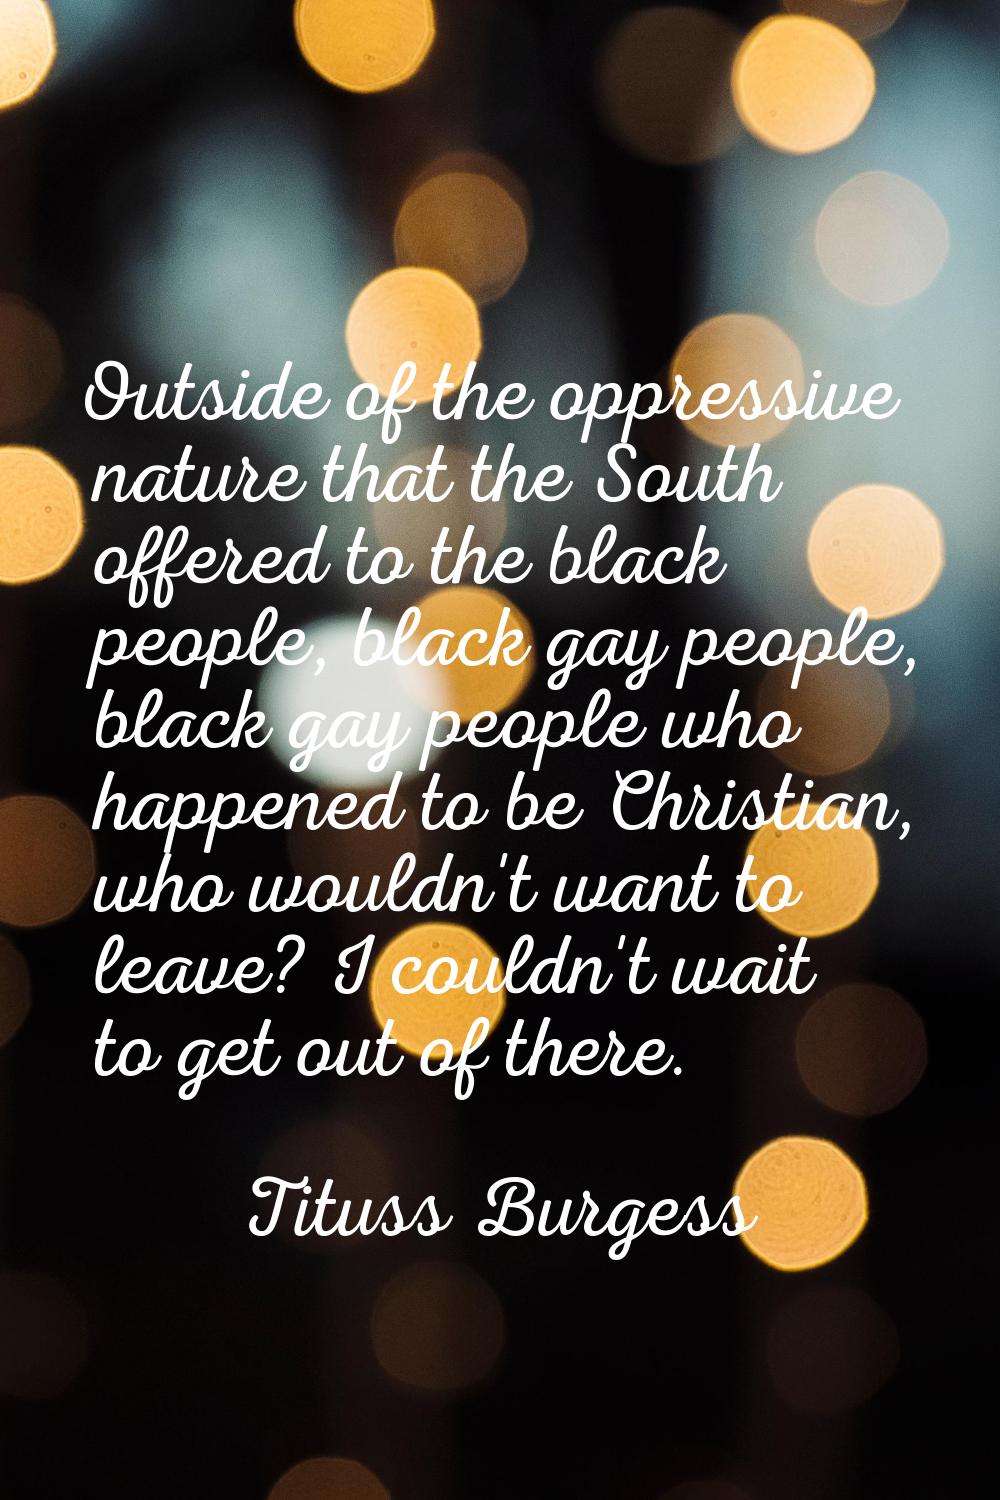 Outside of the oppressive nature that the South offered to the black people, black gay people, blac